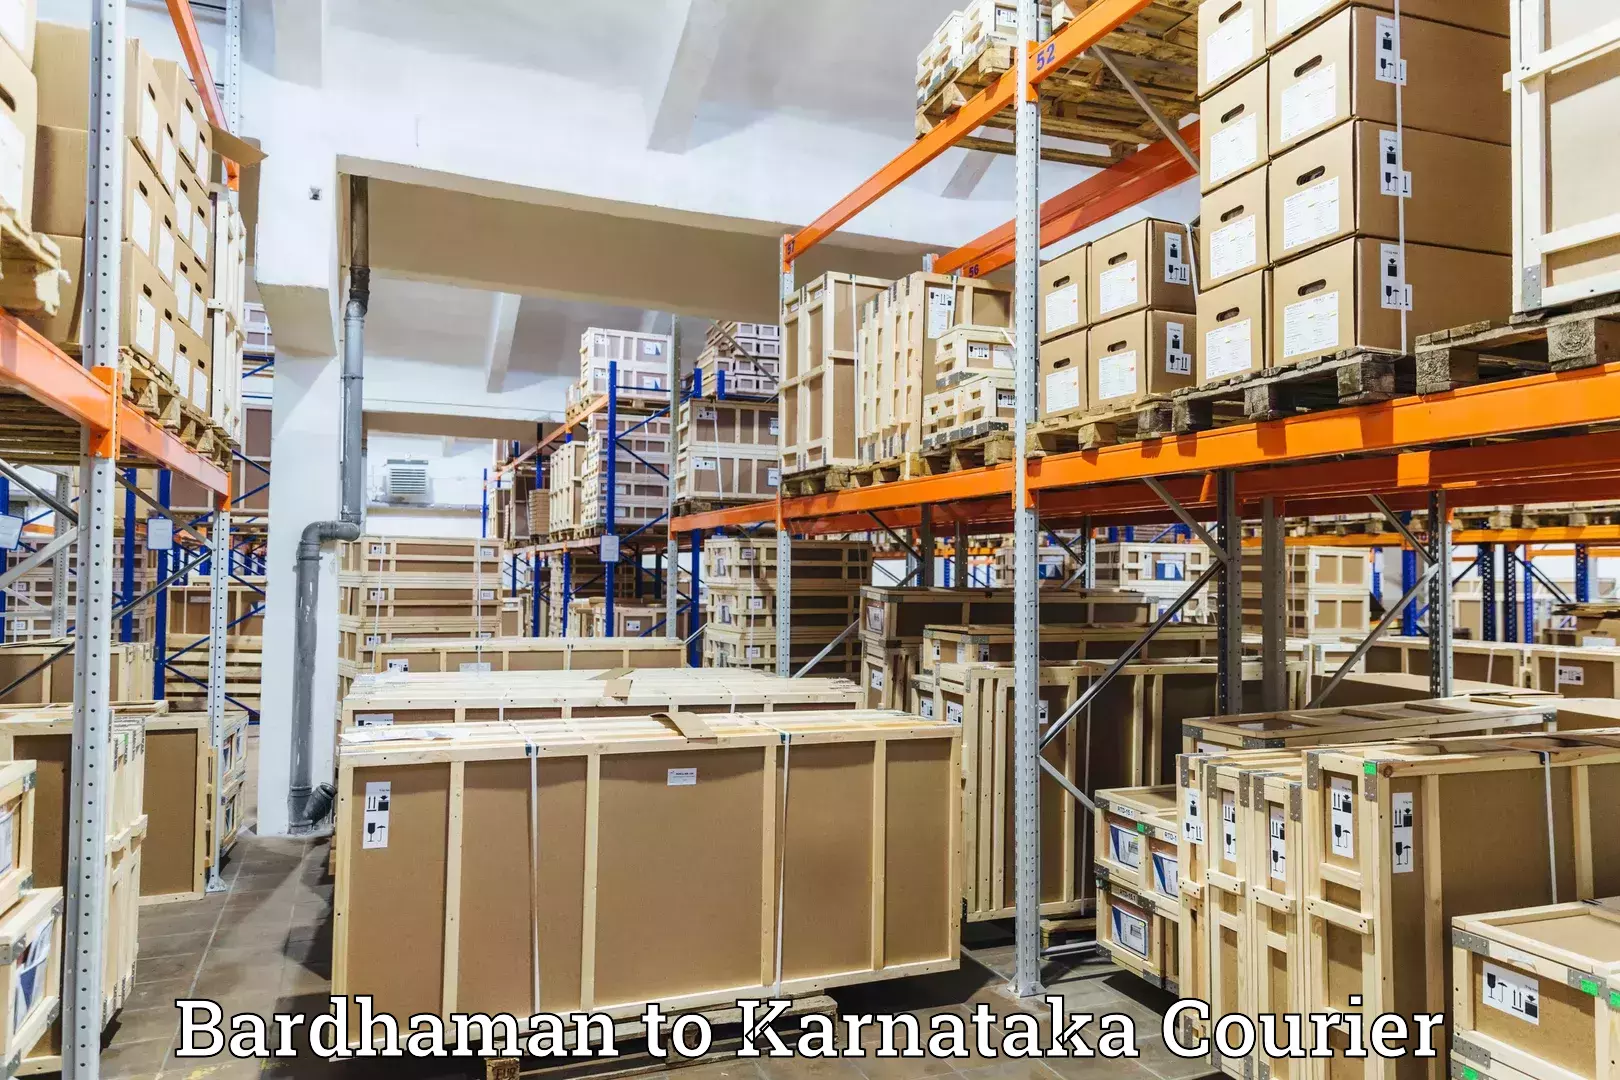 Global courier networks Bardhaman to Mangalore Port